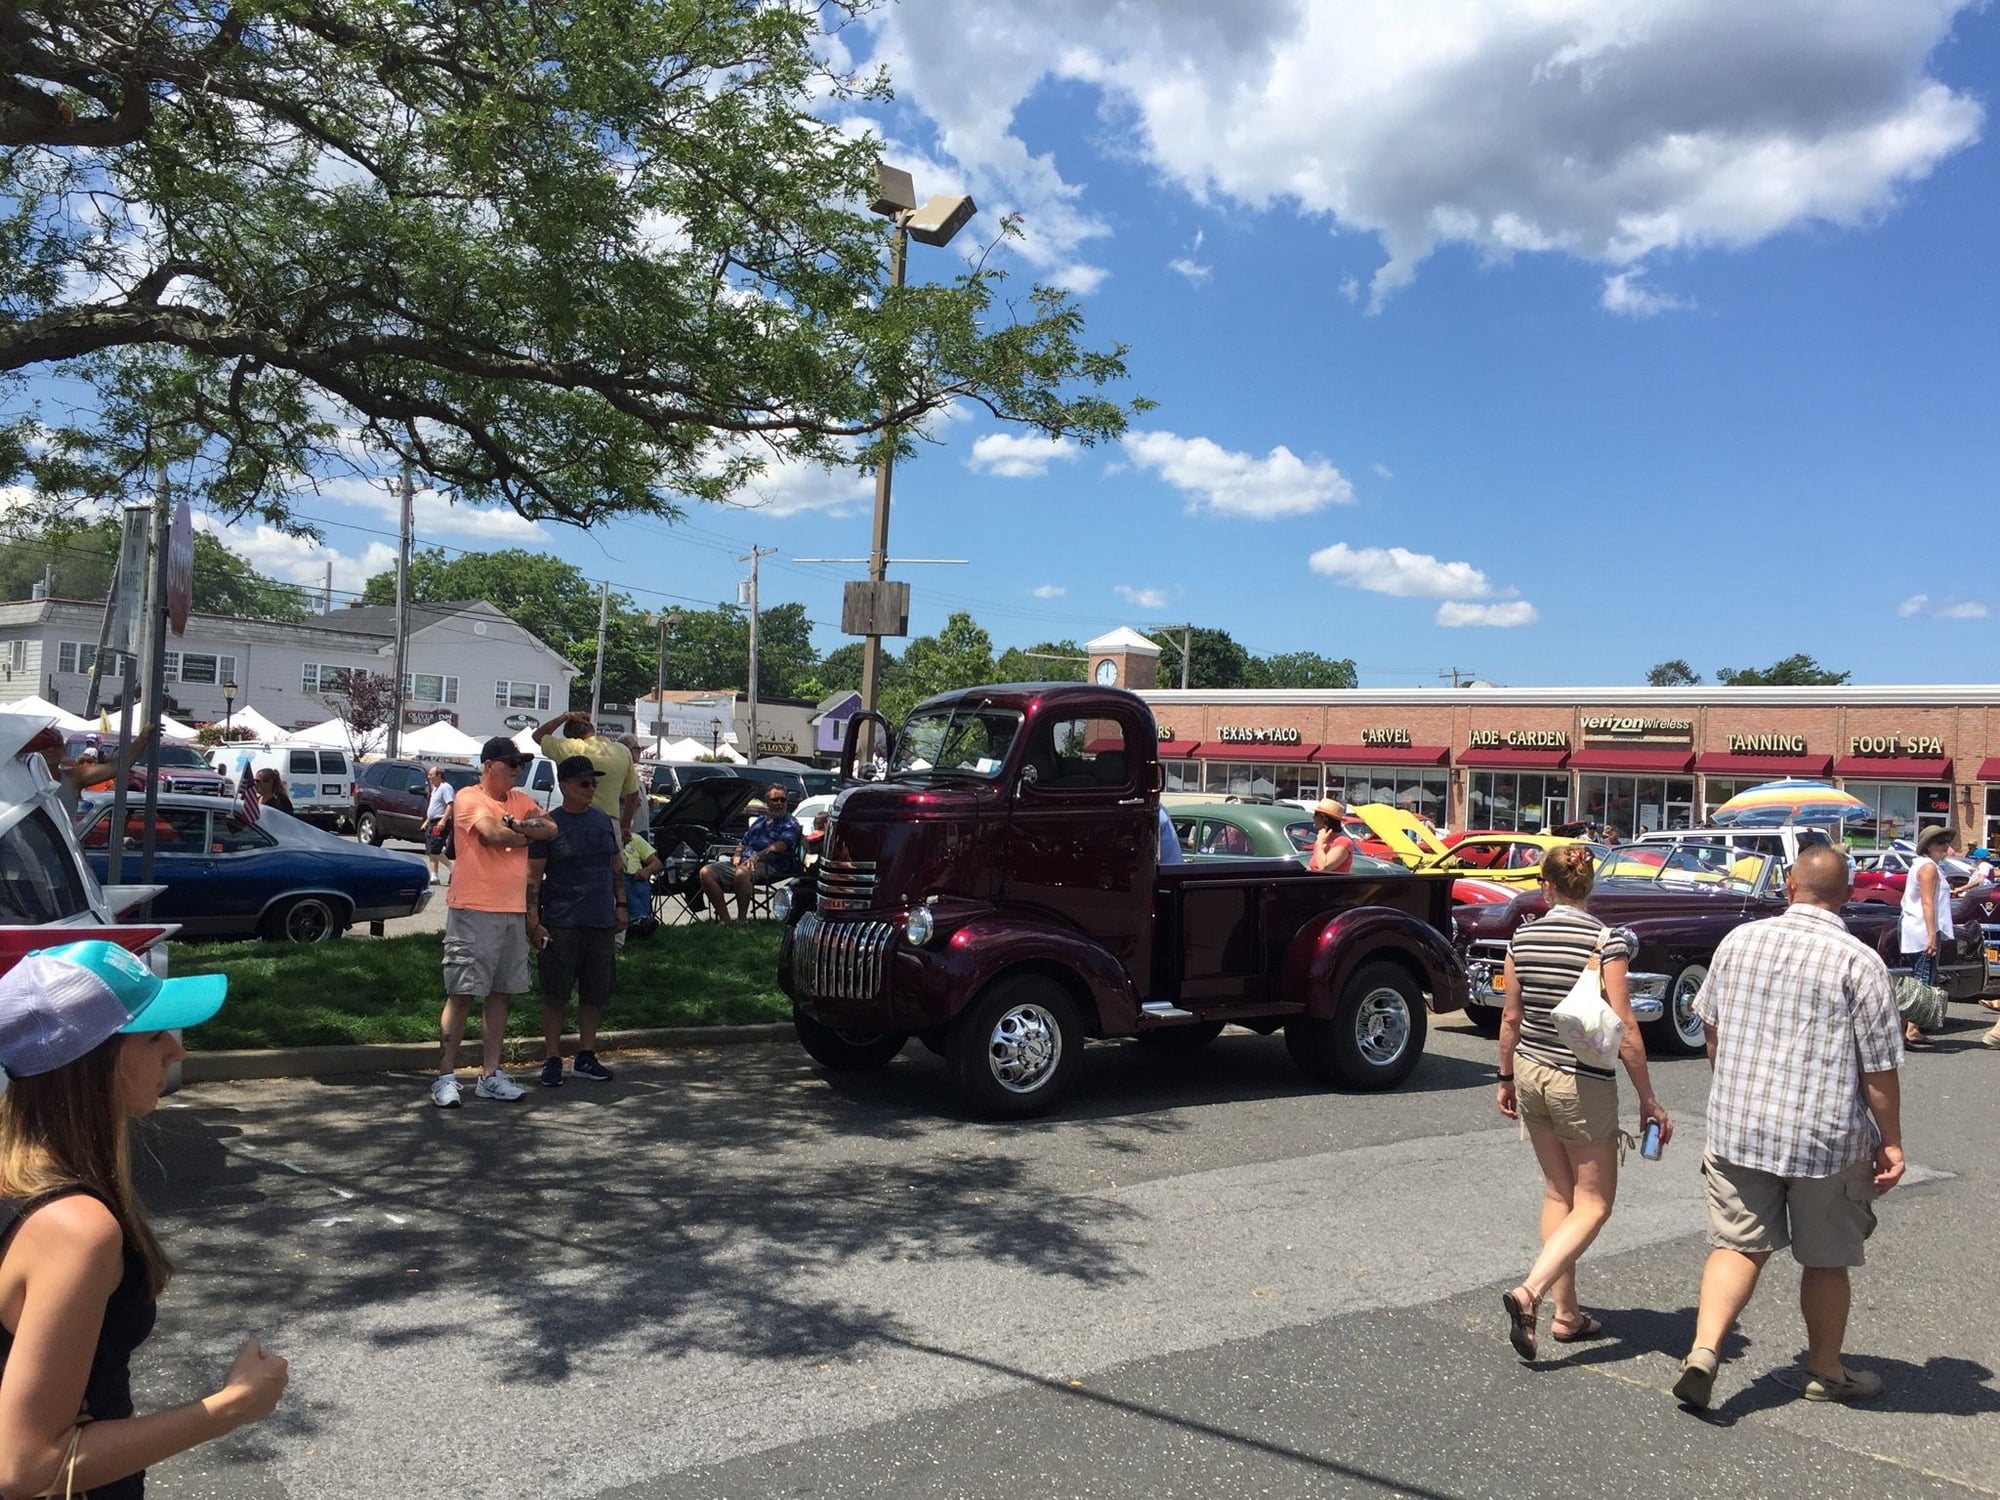 Sayville New York Car Show The Mustang Source Ford Mustang Forums